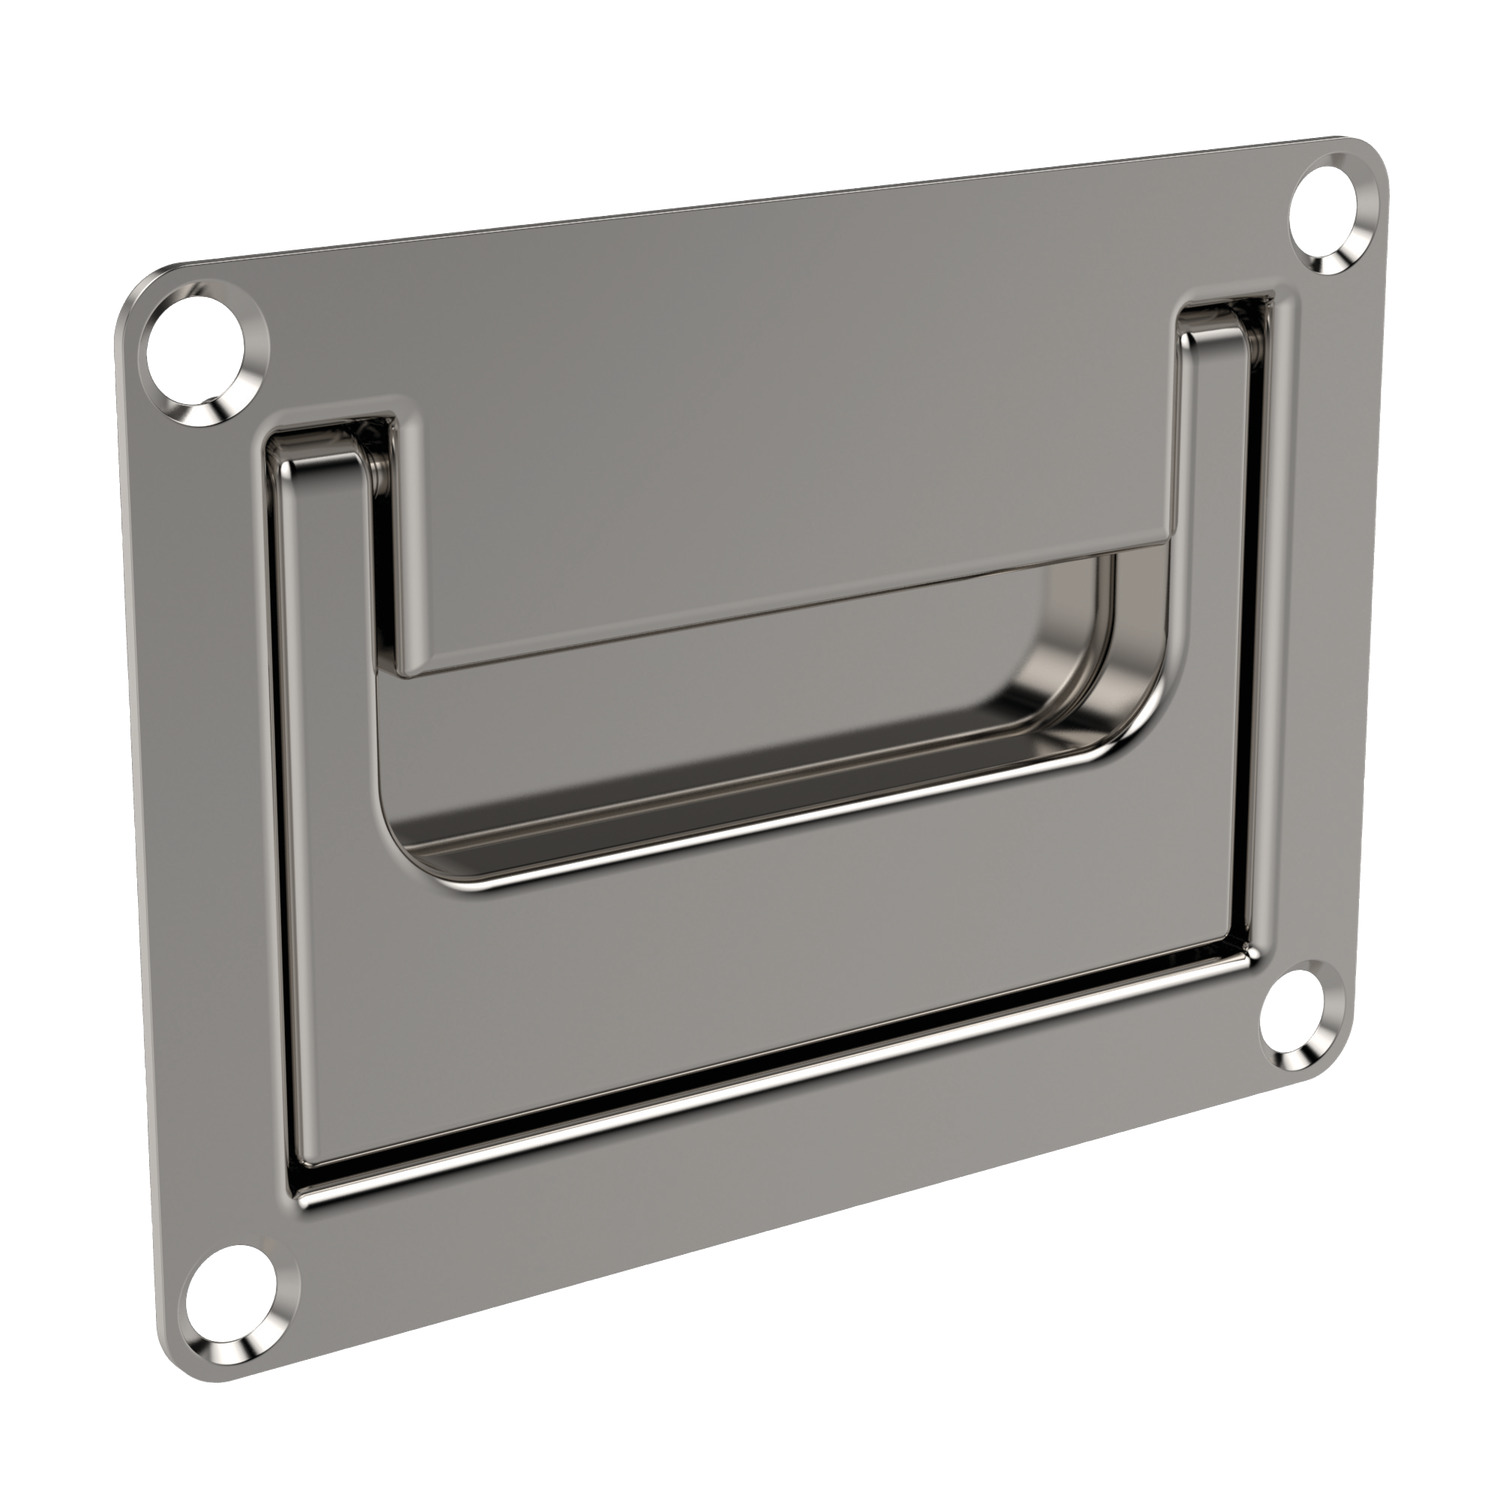 Tray Handle, Collapsible Stainless steel tray handle design pull handle. Handle features a spring return function to return to position when released.